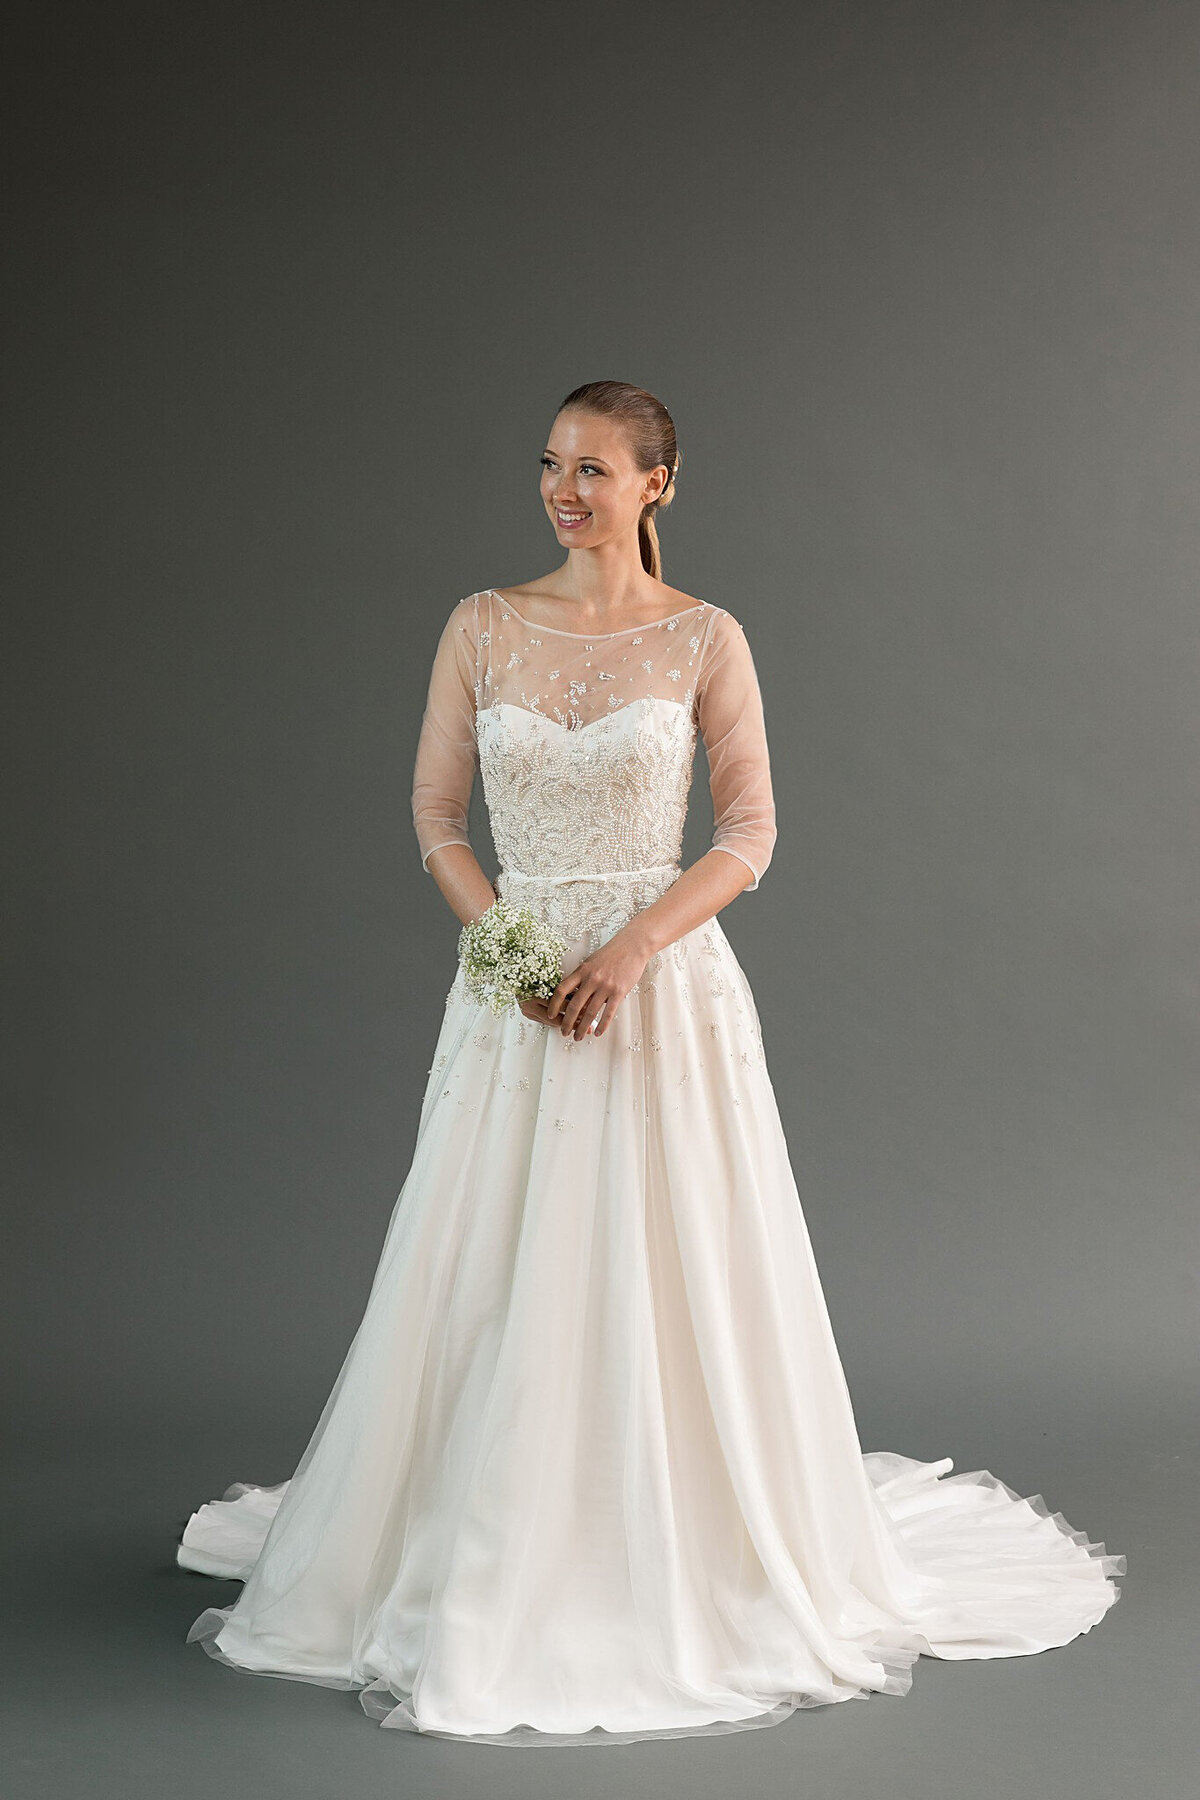 The Rei bridal style is a crystal and pearl beaded wedding dress with pockets, an illusion neckline, and sheer three-quarter sleeves.